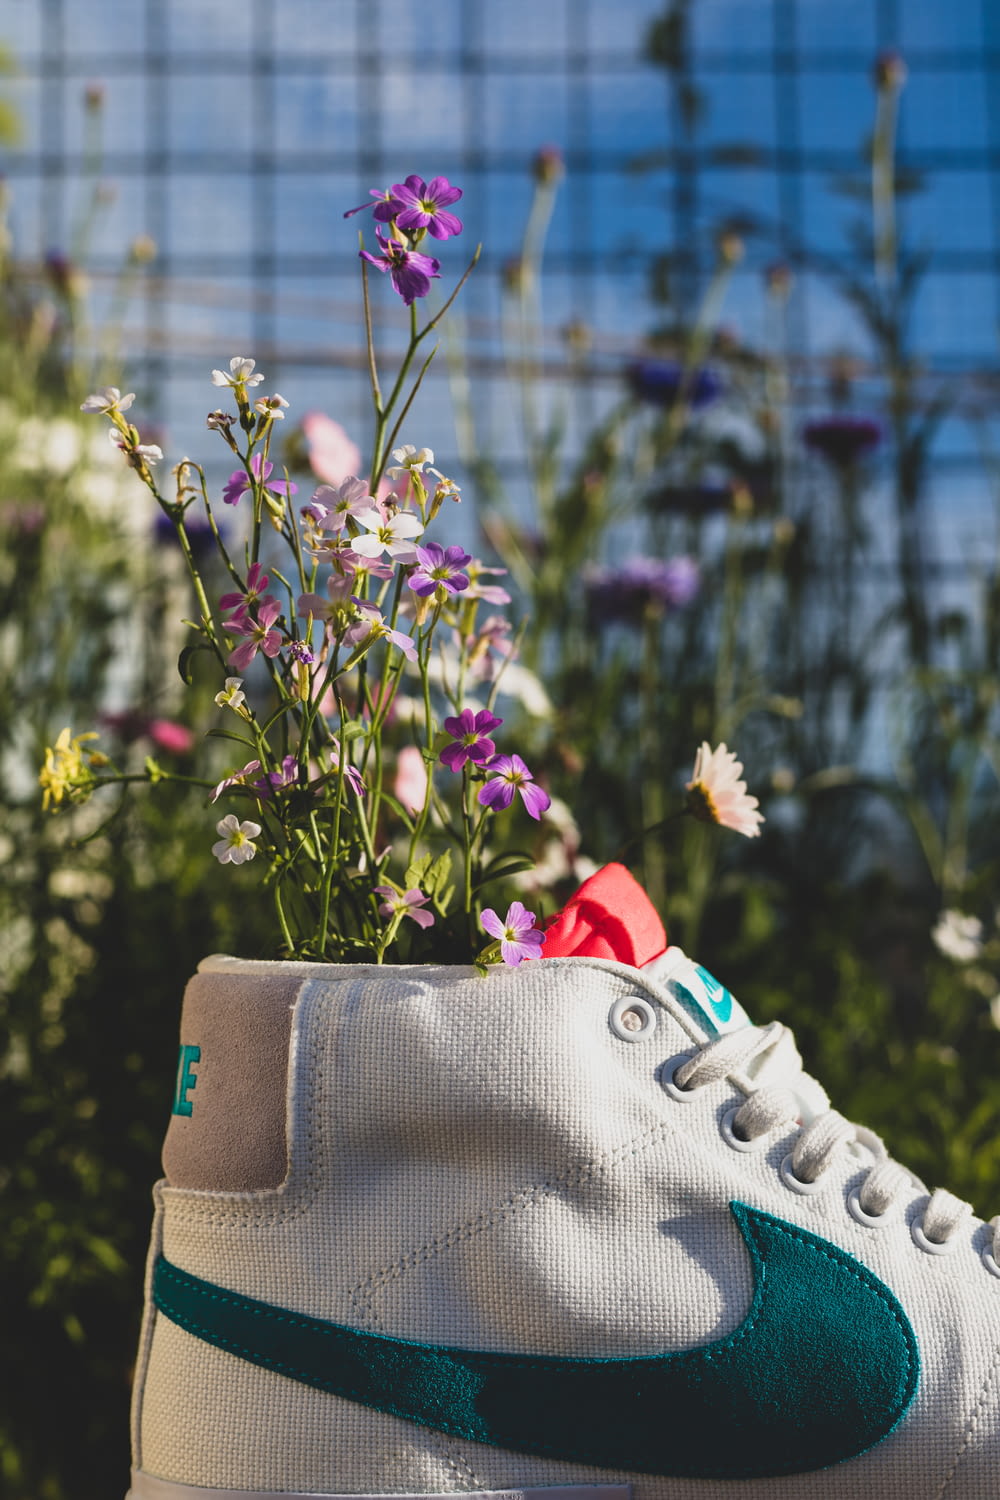 a pair of sneakers with flowers growing out of them